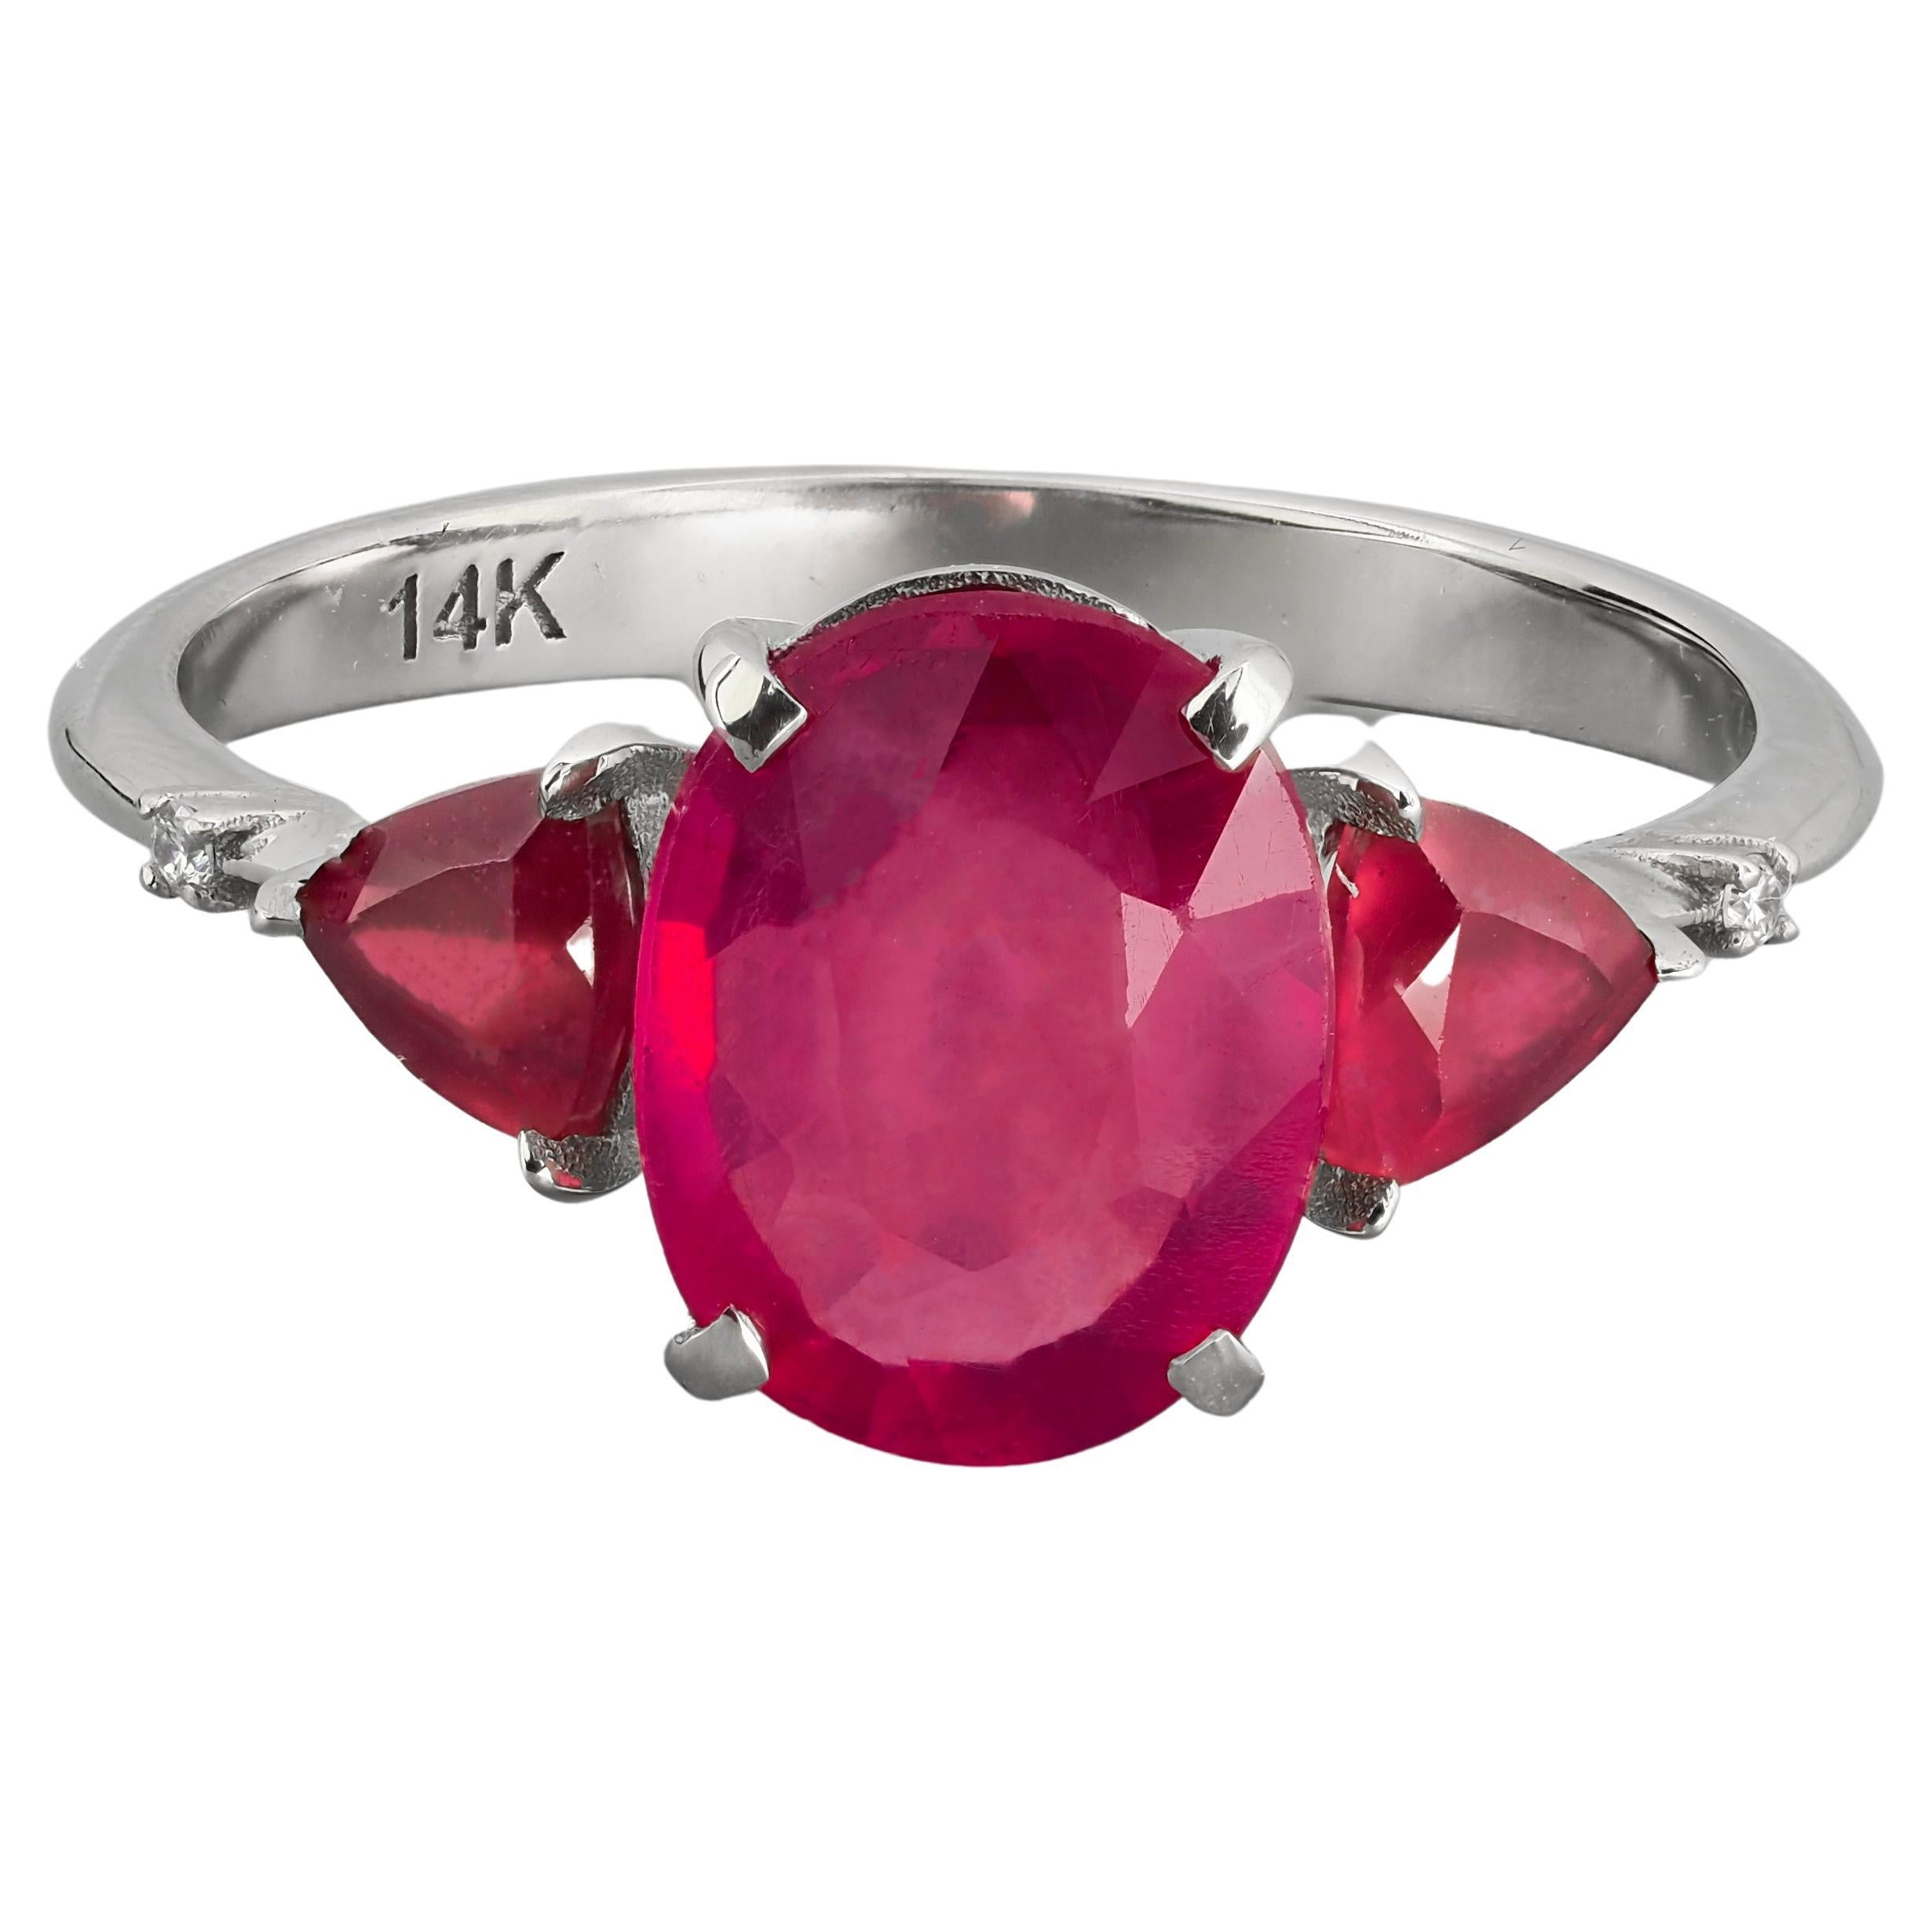 14 karat Gold Ring with Ruby and Diamonds